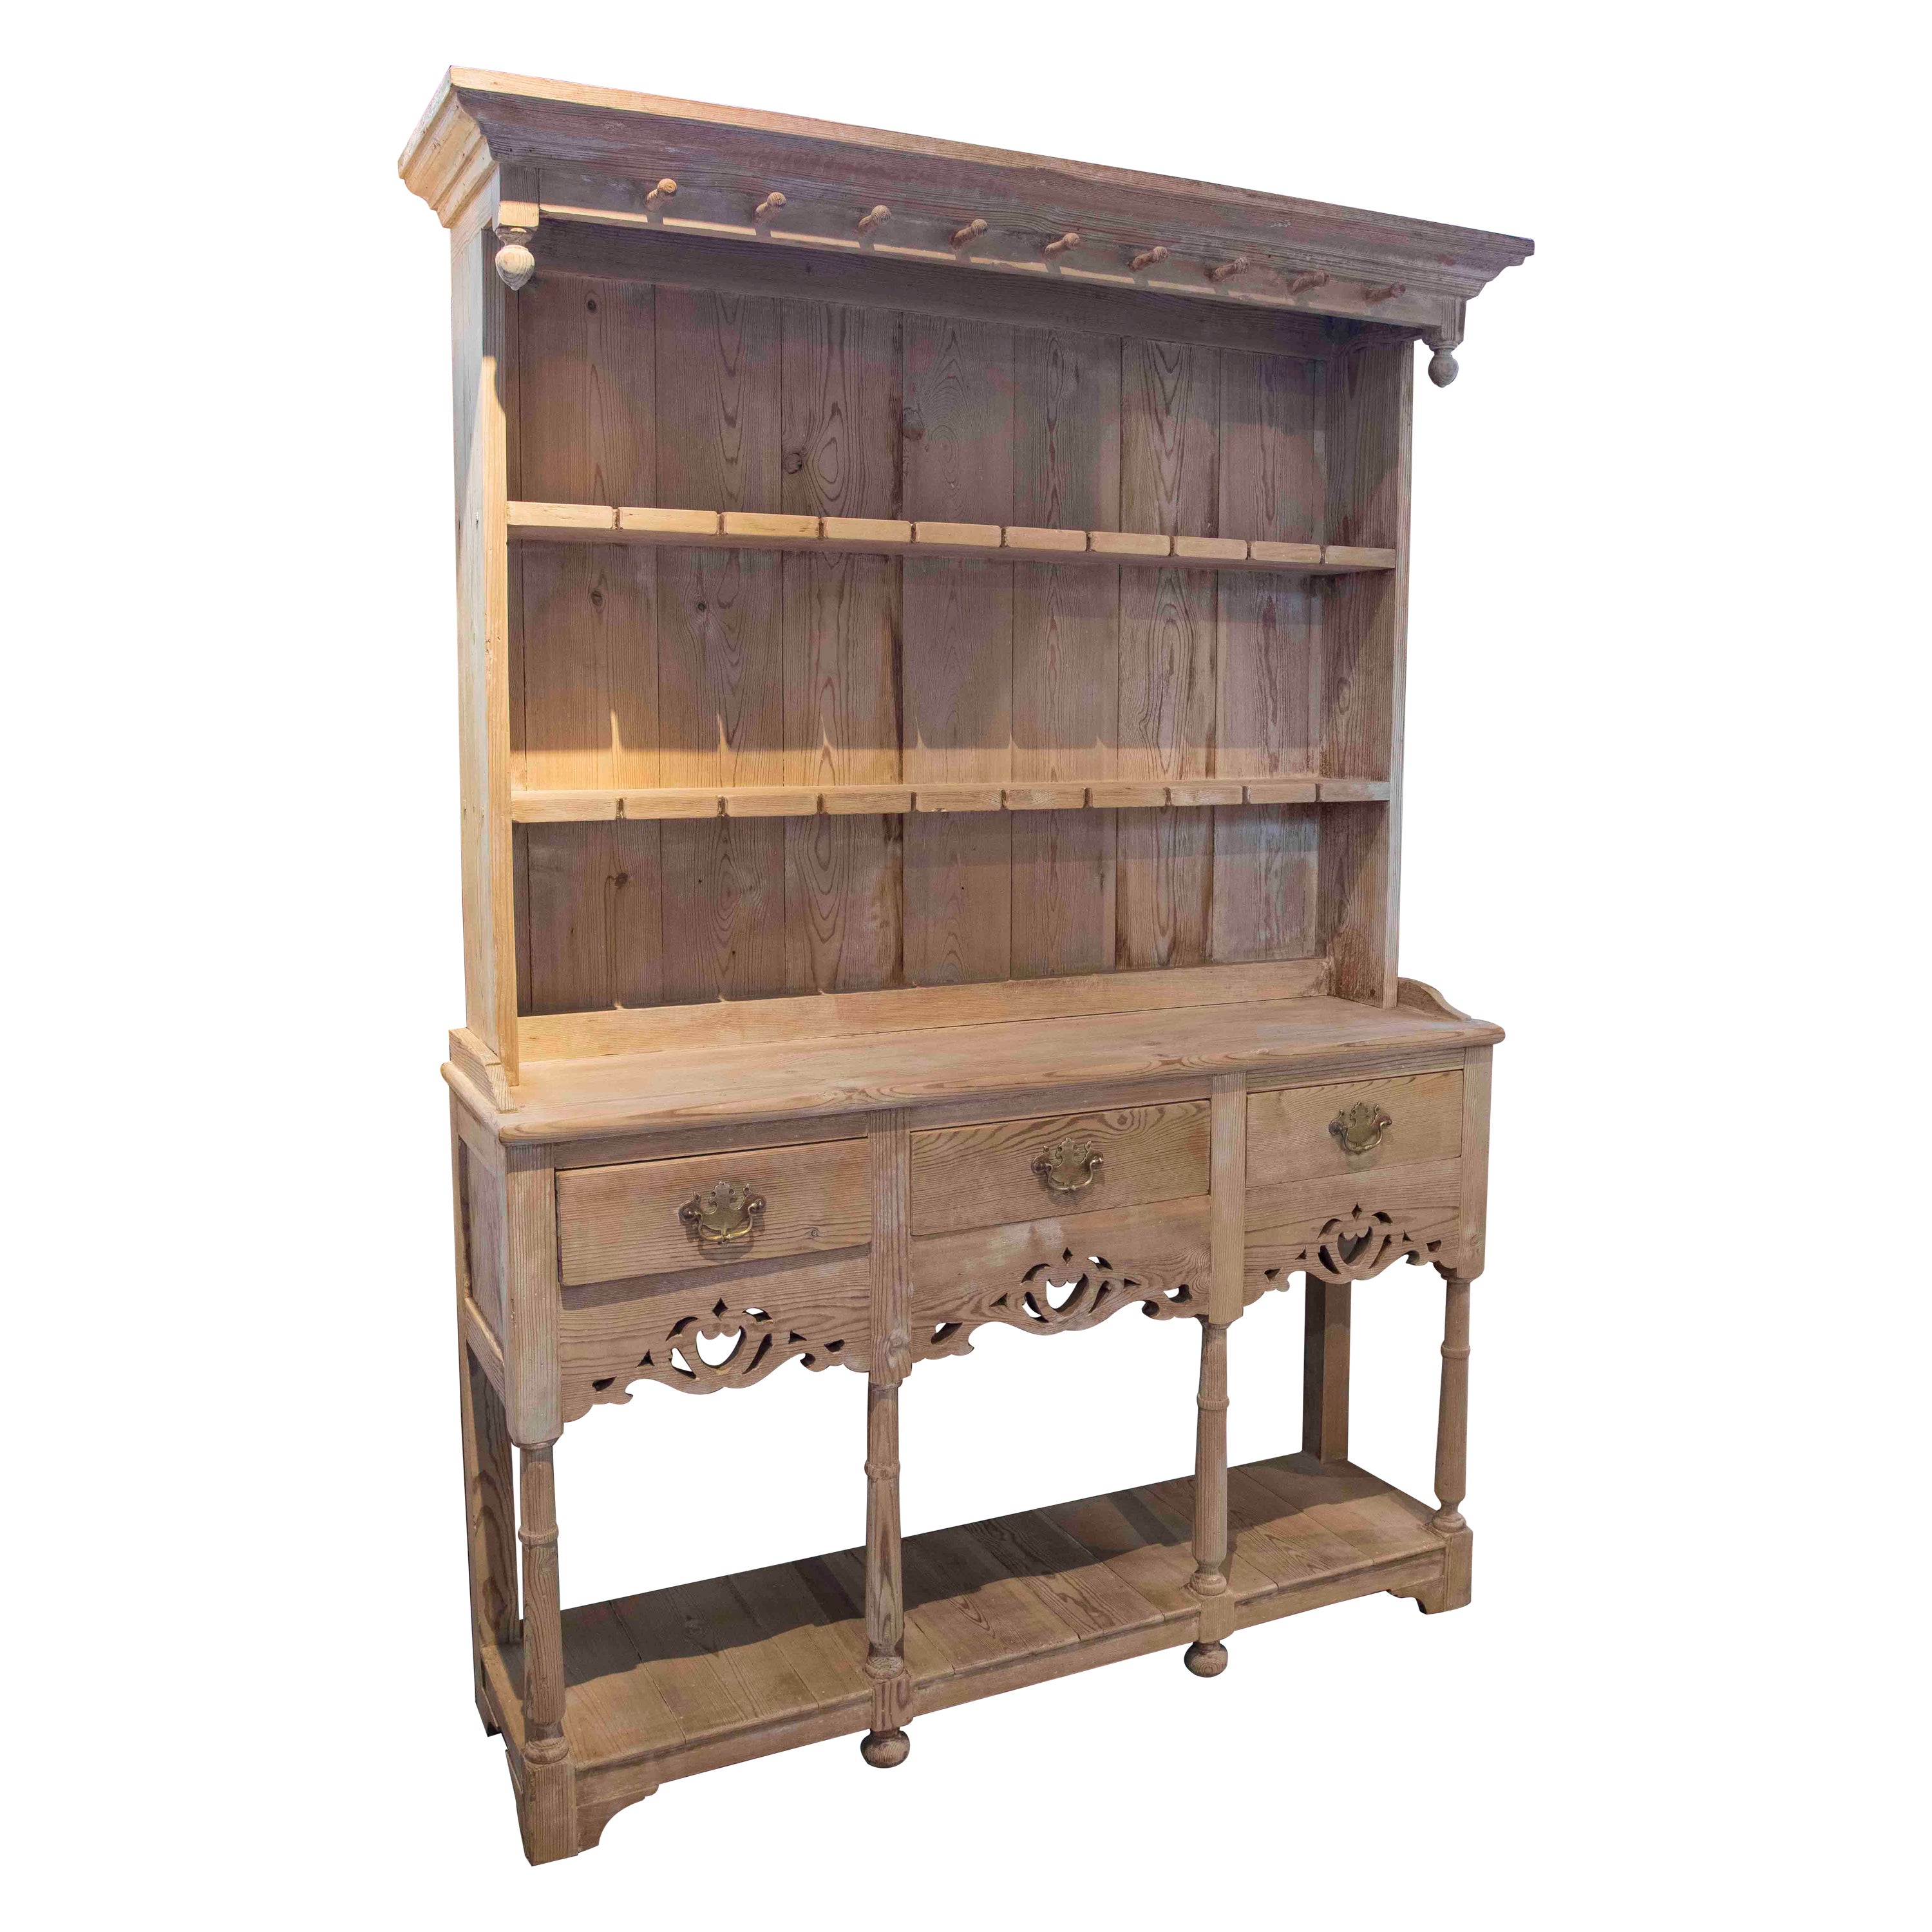 19th Century Spanish Pine Chest with Shelves and Drawers